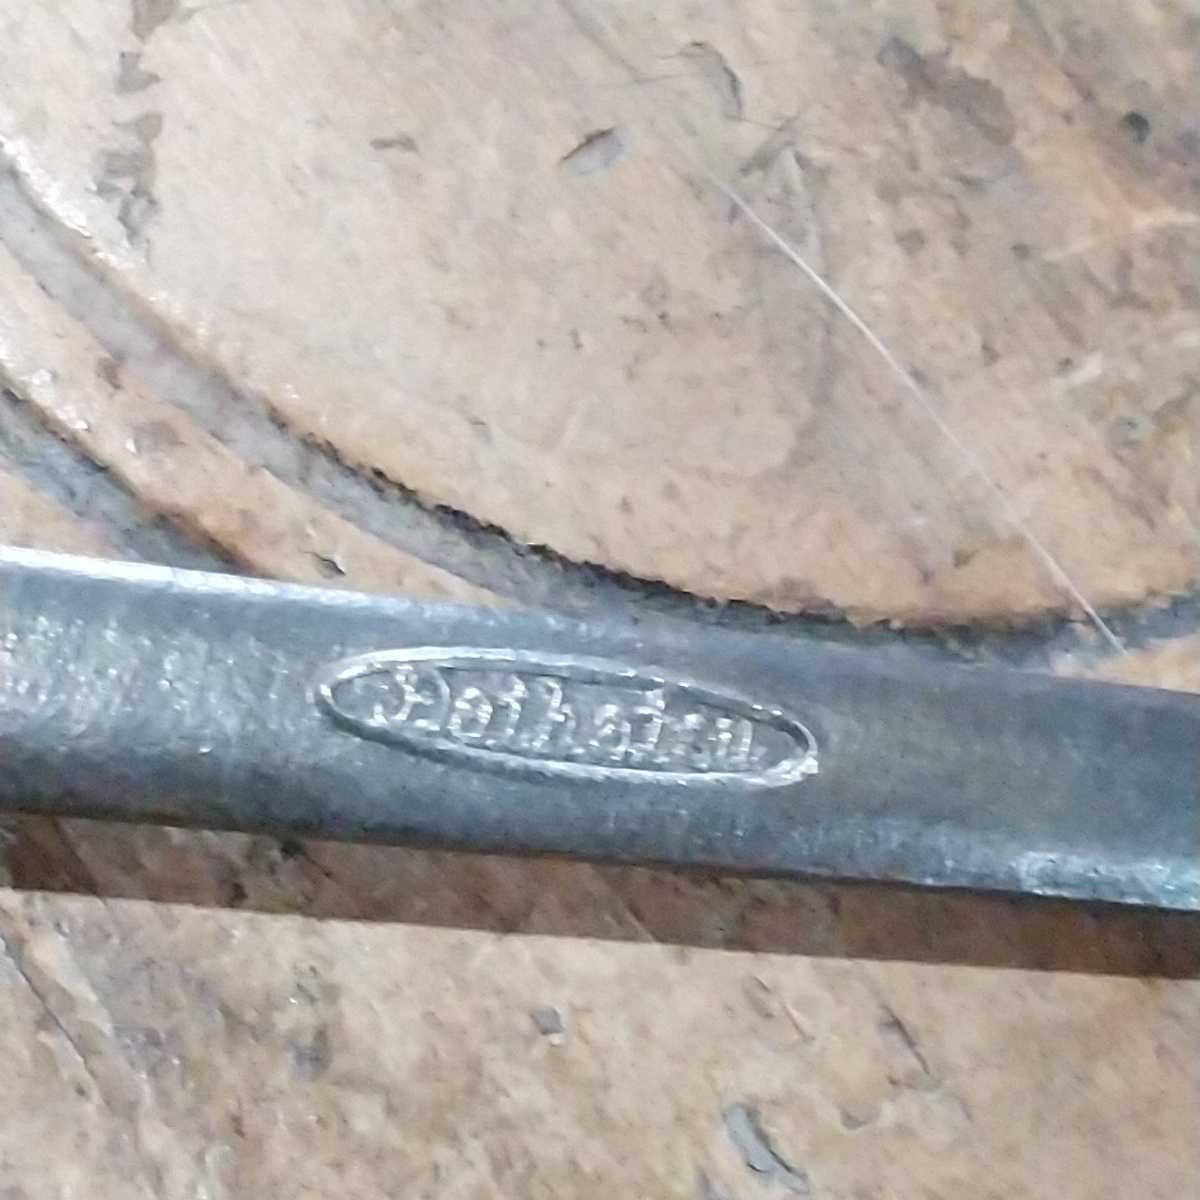  Daihatsu industry loaded tool combination wrench size inscription 10-12mm. total length 125.8mm. Daihatsu back surface - NEON B-H tough to Rocky COPEN